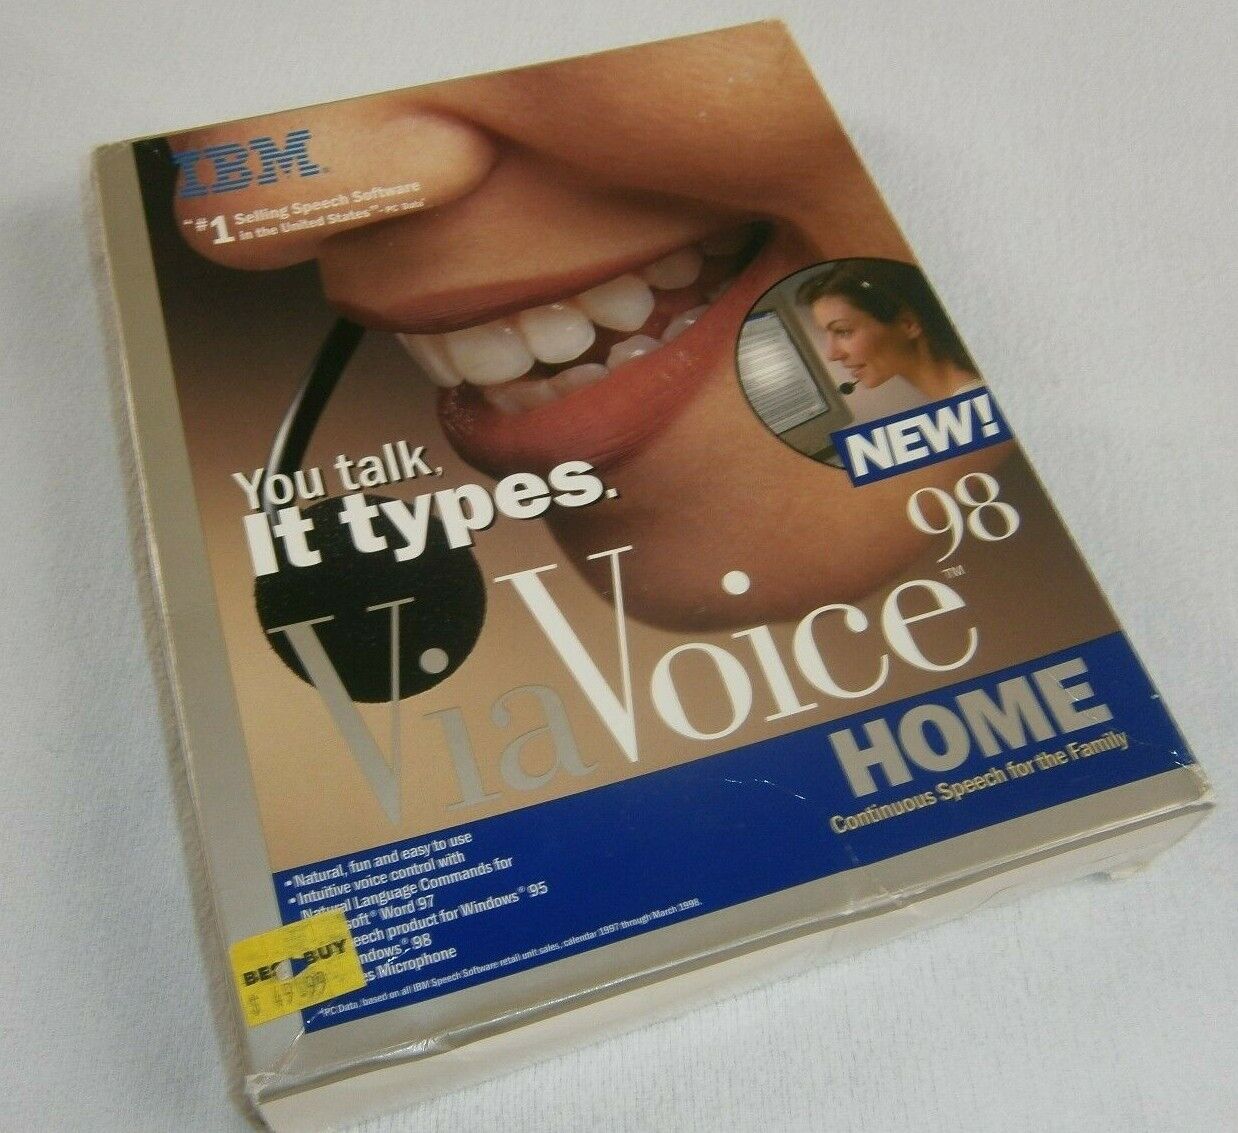 VTG NEW OPEN BOX IBM VIA VOICE 98 HOME COMPUTER COMPLETE HEADSET & MICROPHONE